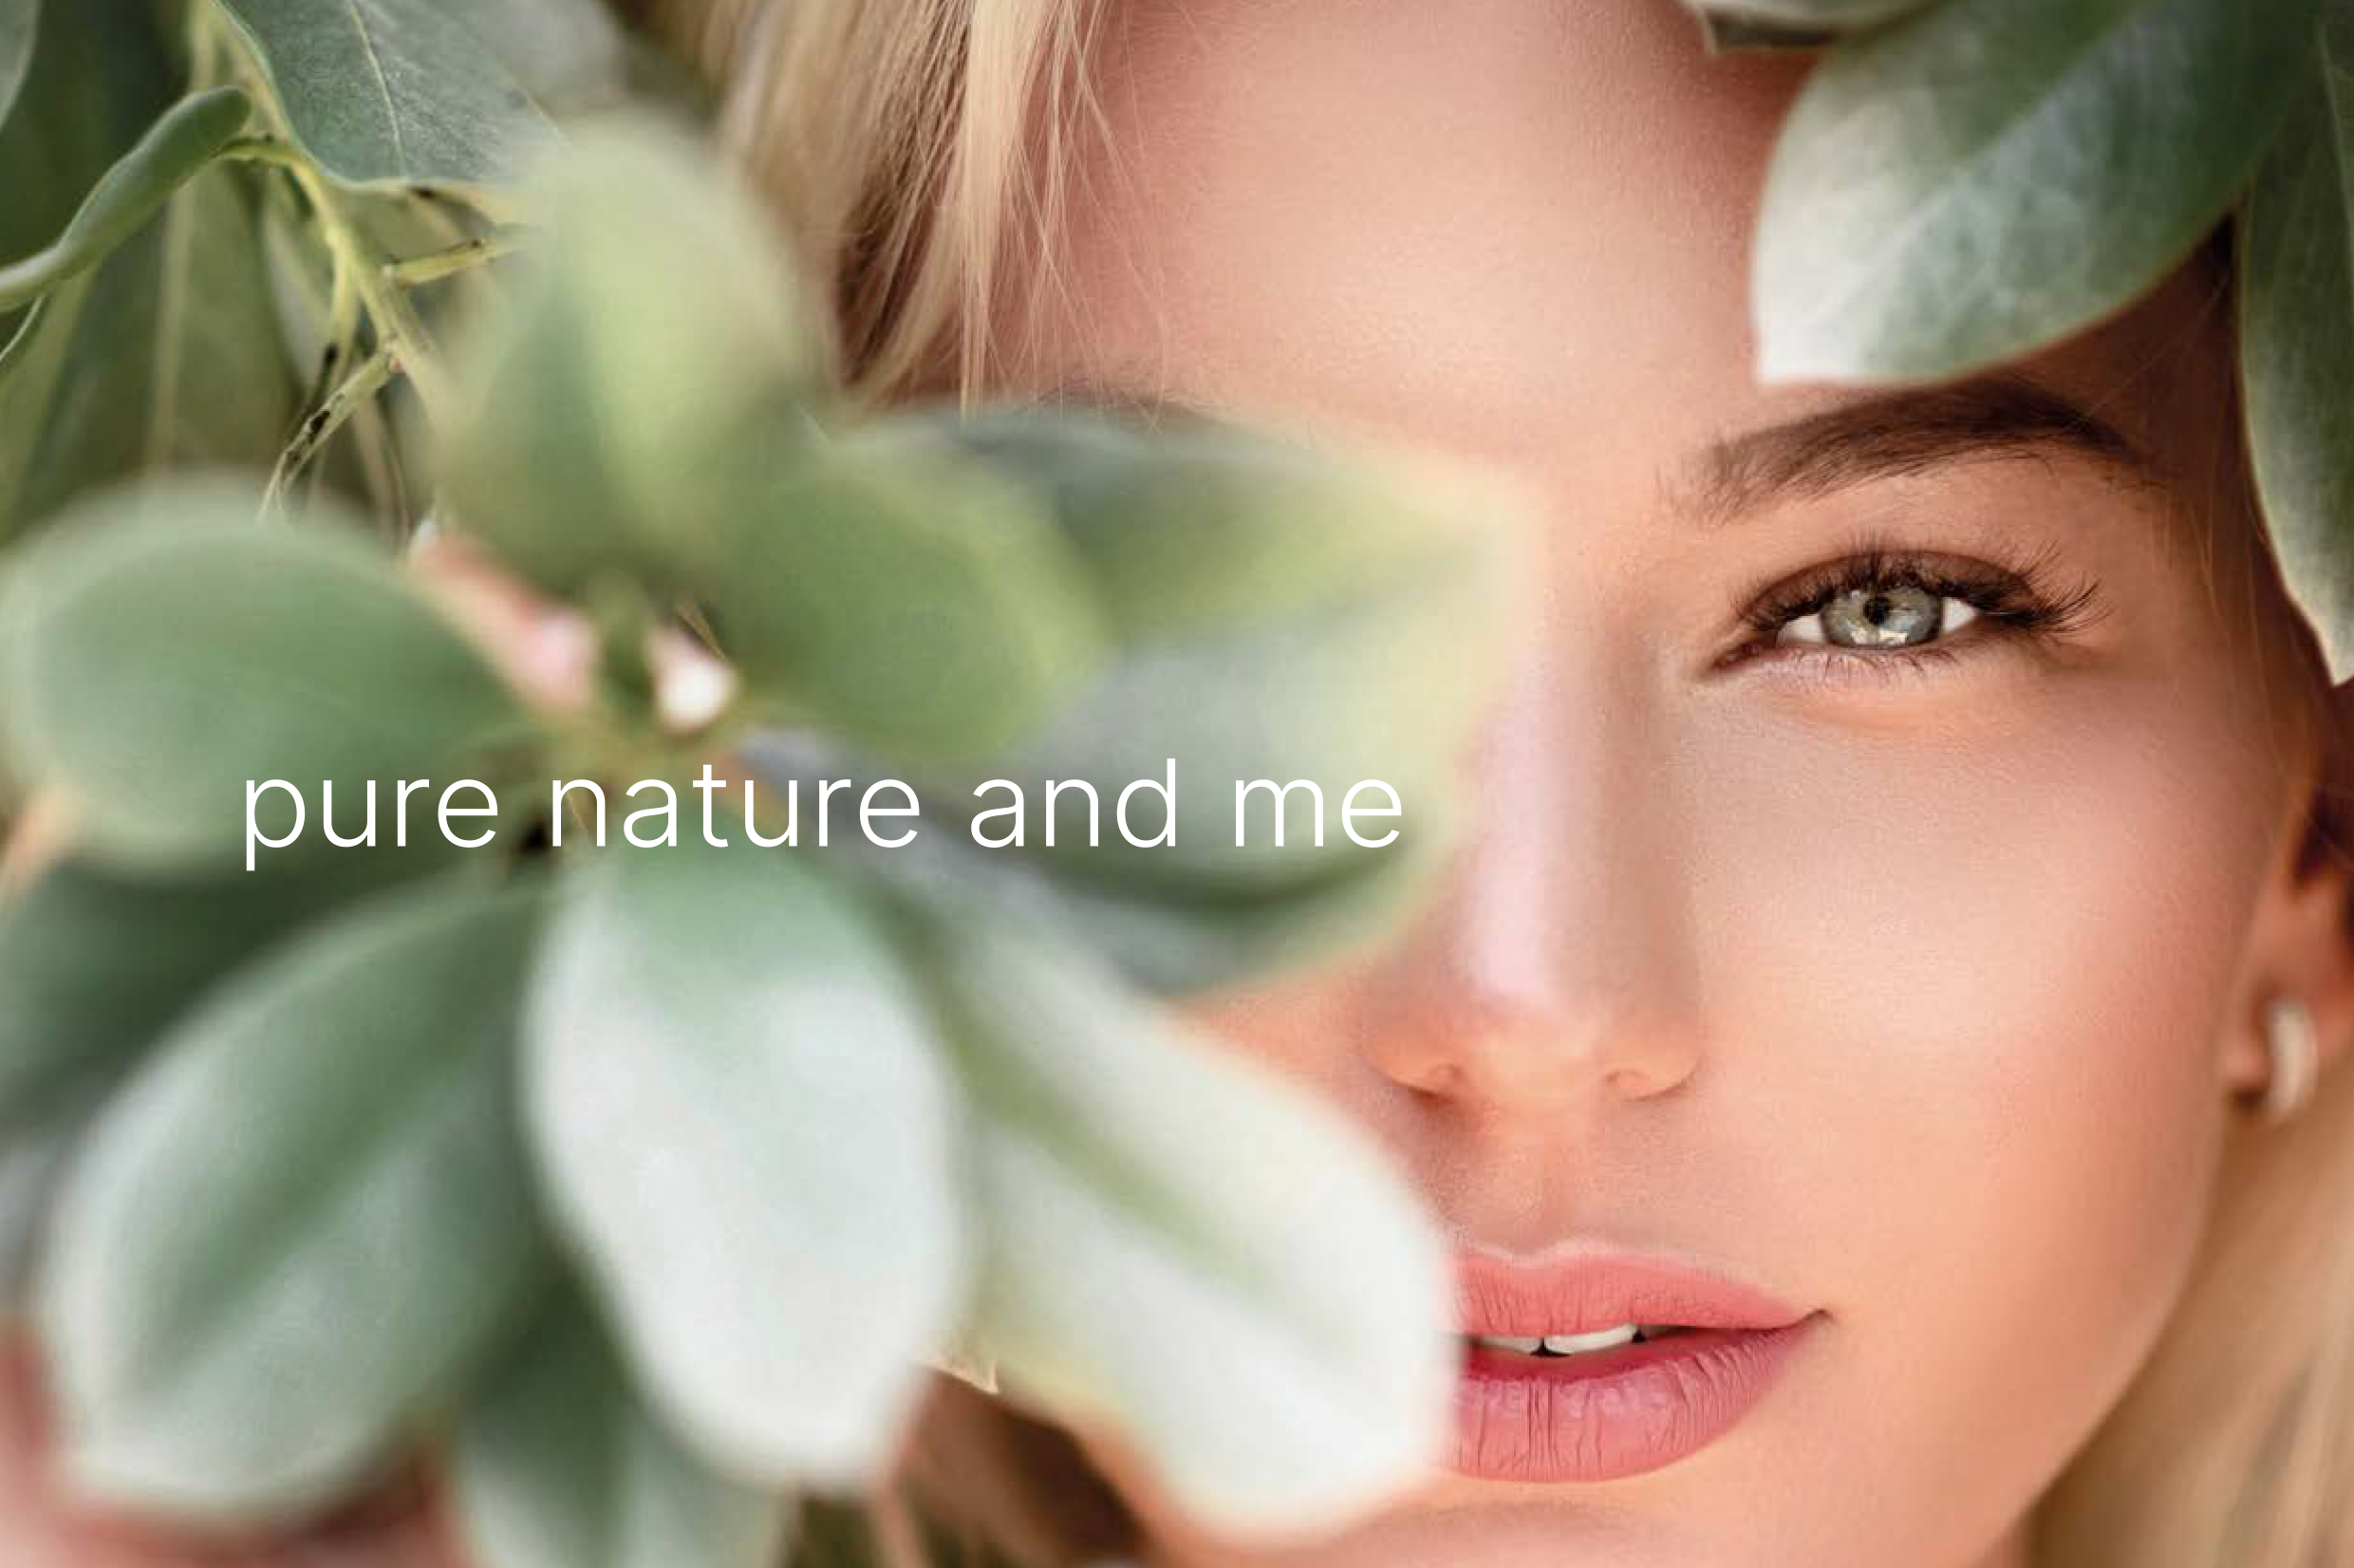 bioLuxe pure nature and me